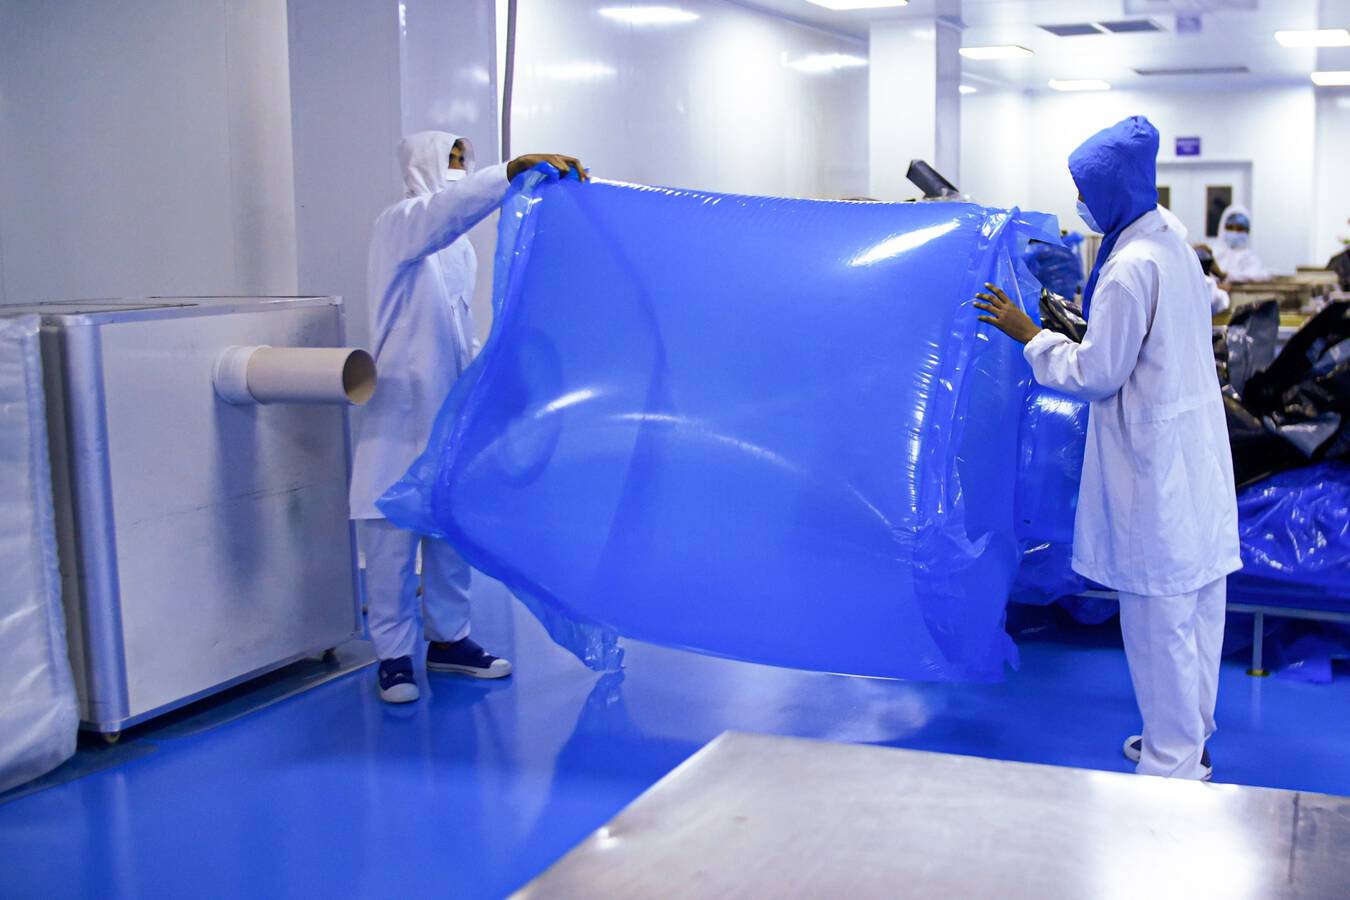 Keep your products safe with Masterpack Masterpack have extensive experience in dealing with delicate products in many industries. Masterpack works with Class 10.000 and Class 100.000 Cleanrooms, which is the equivalent of ISO 7 and ISO 8.